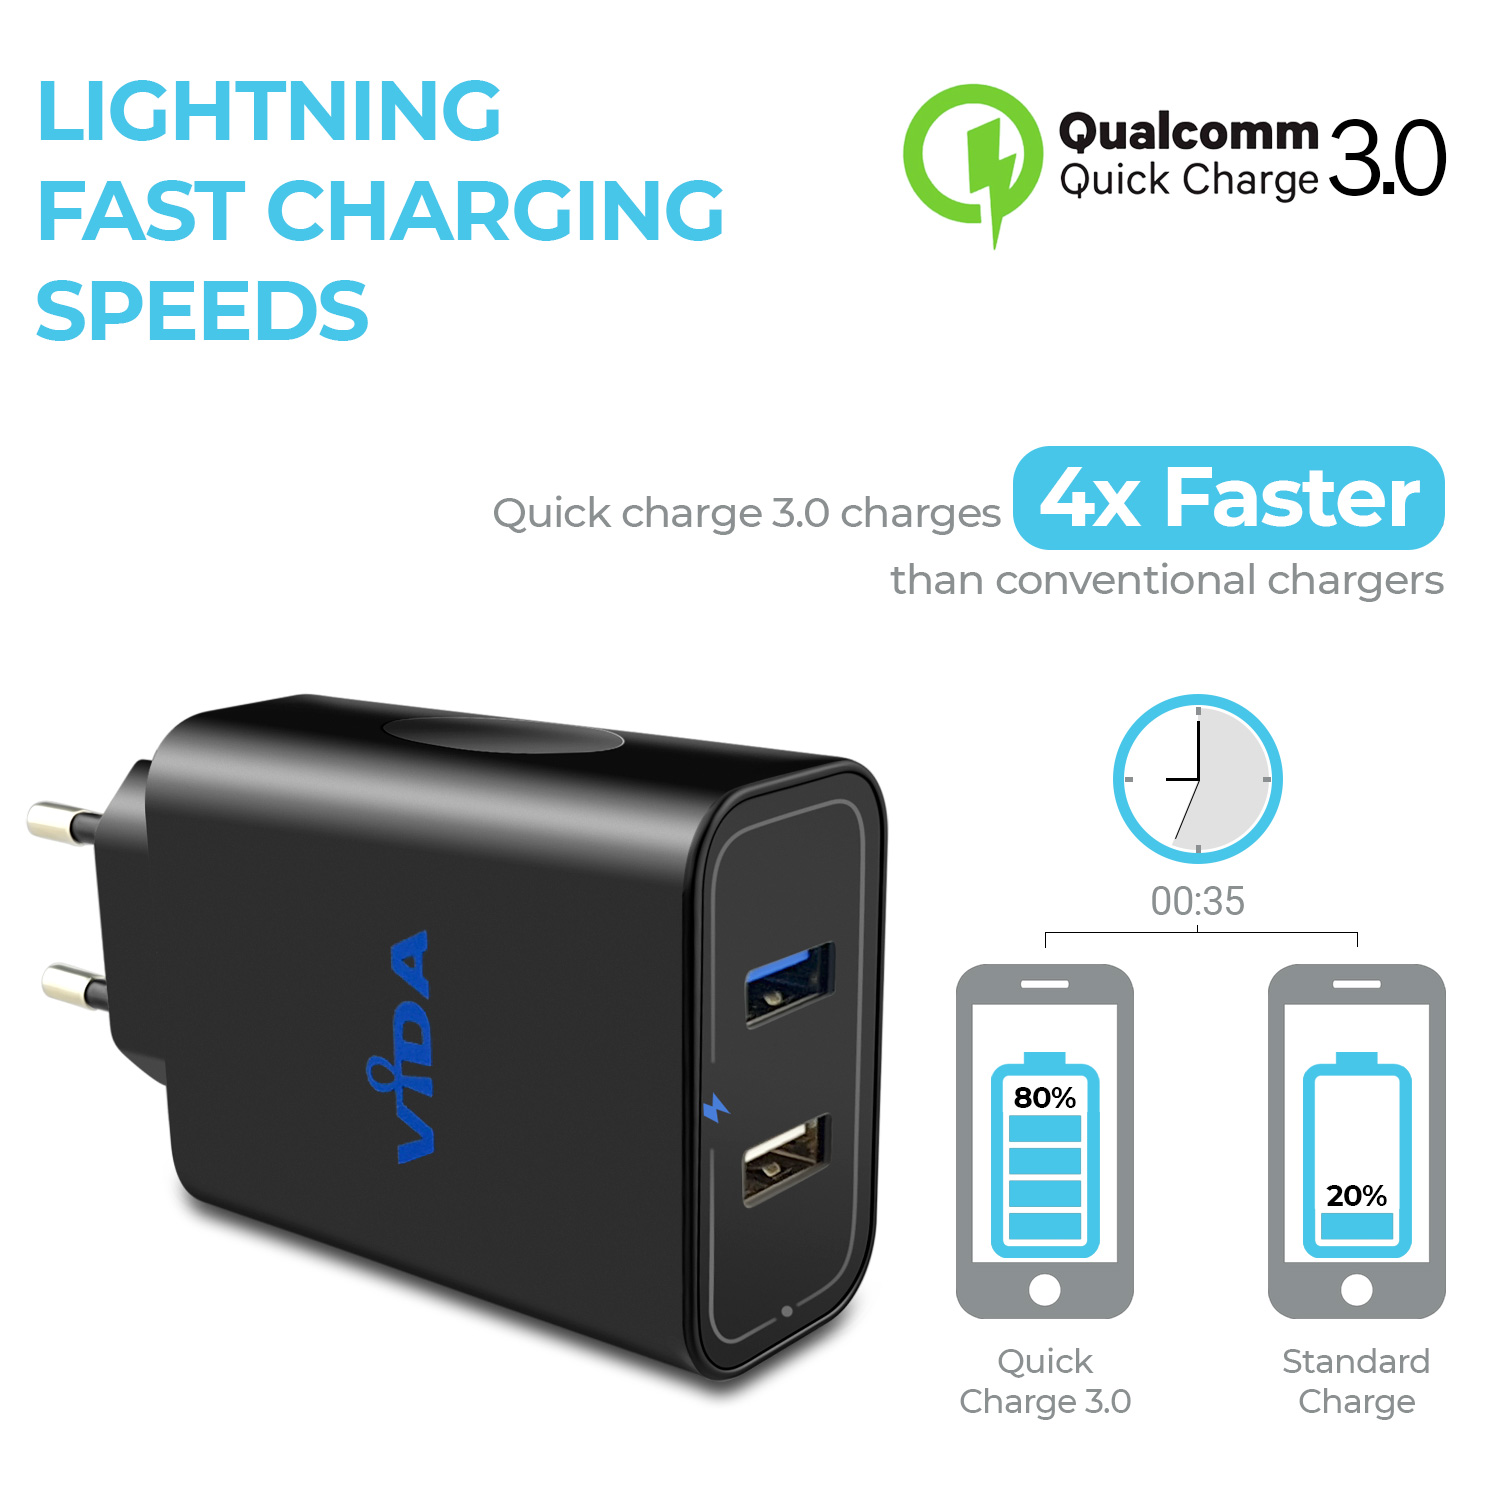  super fast European 2-pin plug compact Vida IT VS3 - USB 2 Port Compact Wall Charger with Quick Charge 3.0 Technology 30W EU plug black colour for mobile phone smartphone cell phone tablet PC usb-powered devices